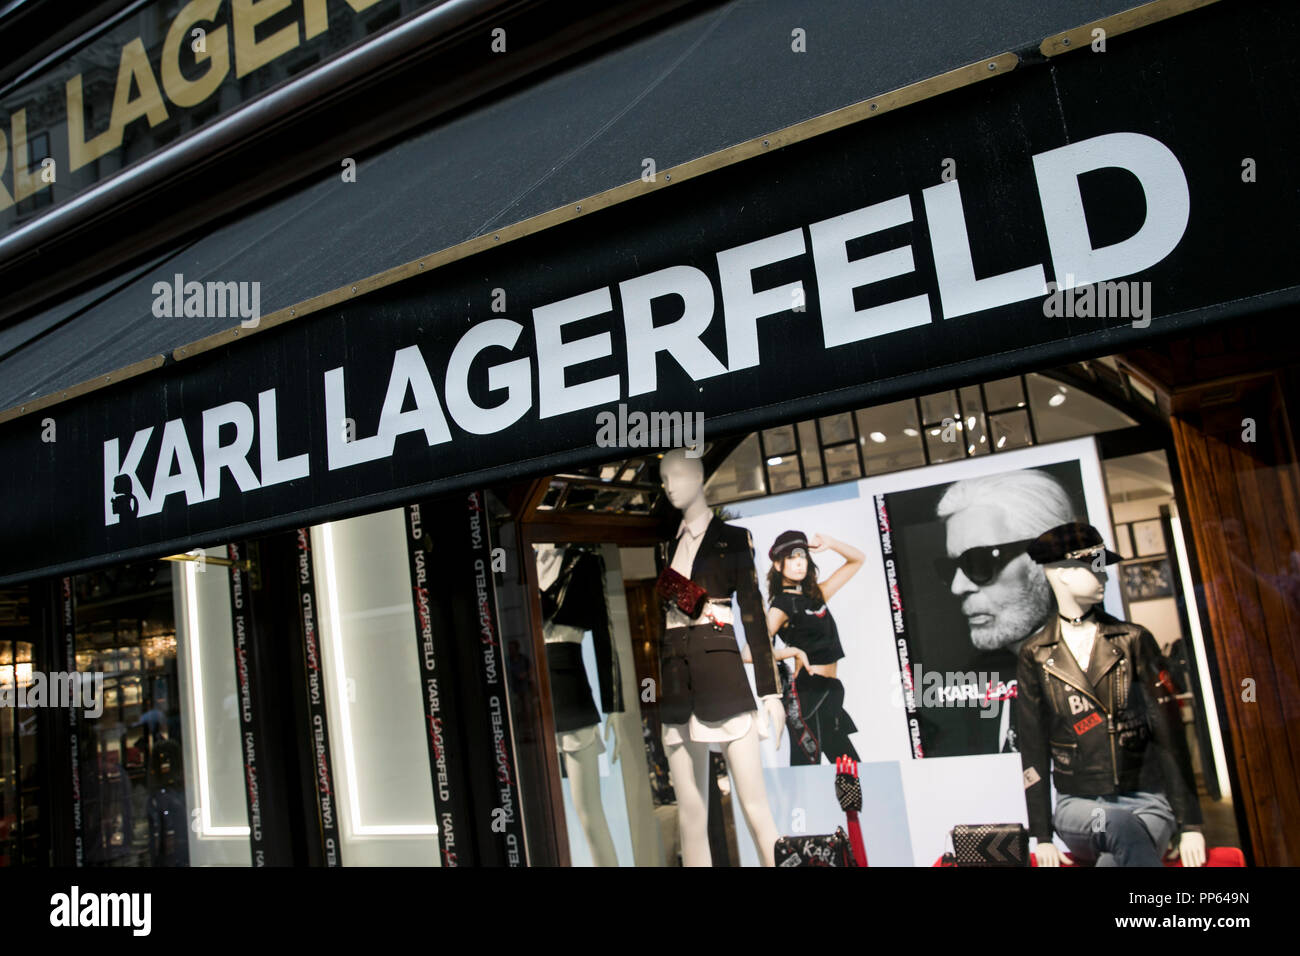 Karl Lagerfeld Logo High Resolution Stock Photography and Images - Alamy